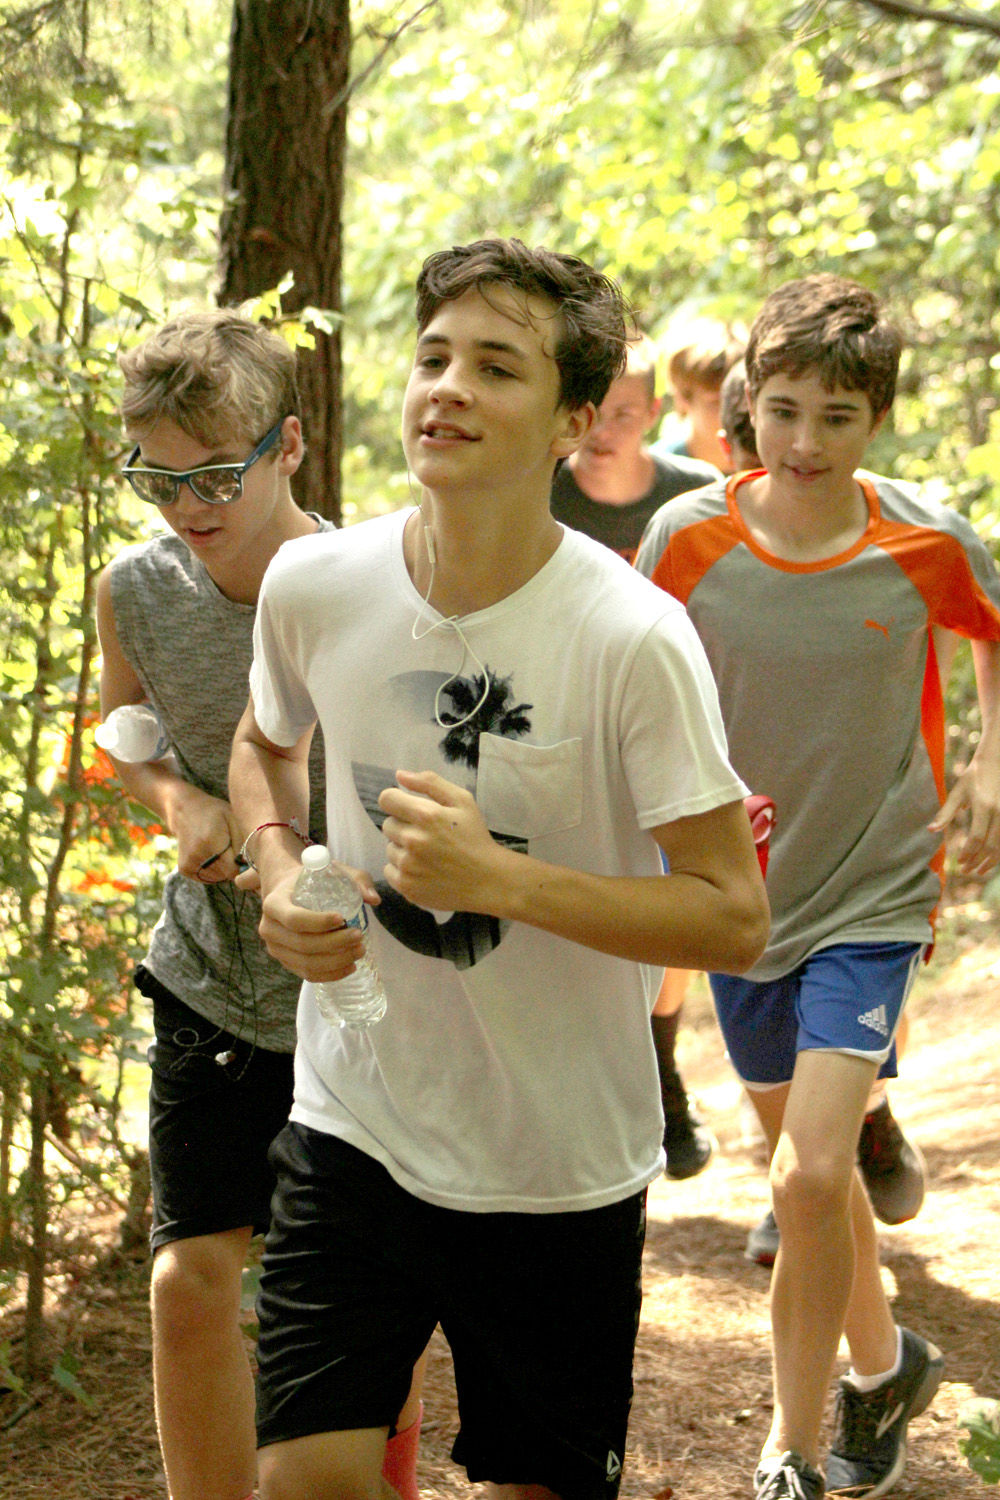 Preing Powhatan Cross Country Today